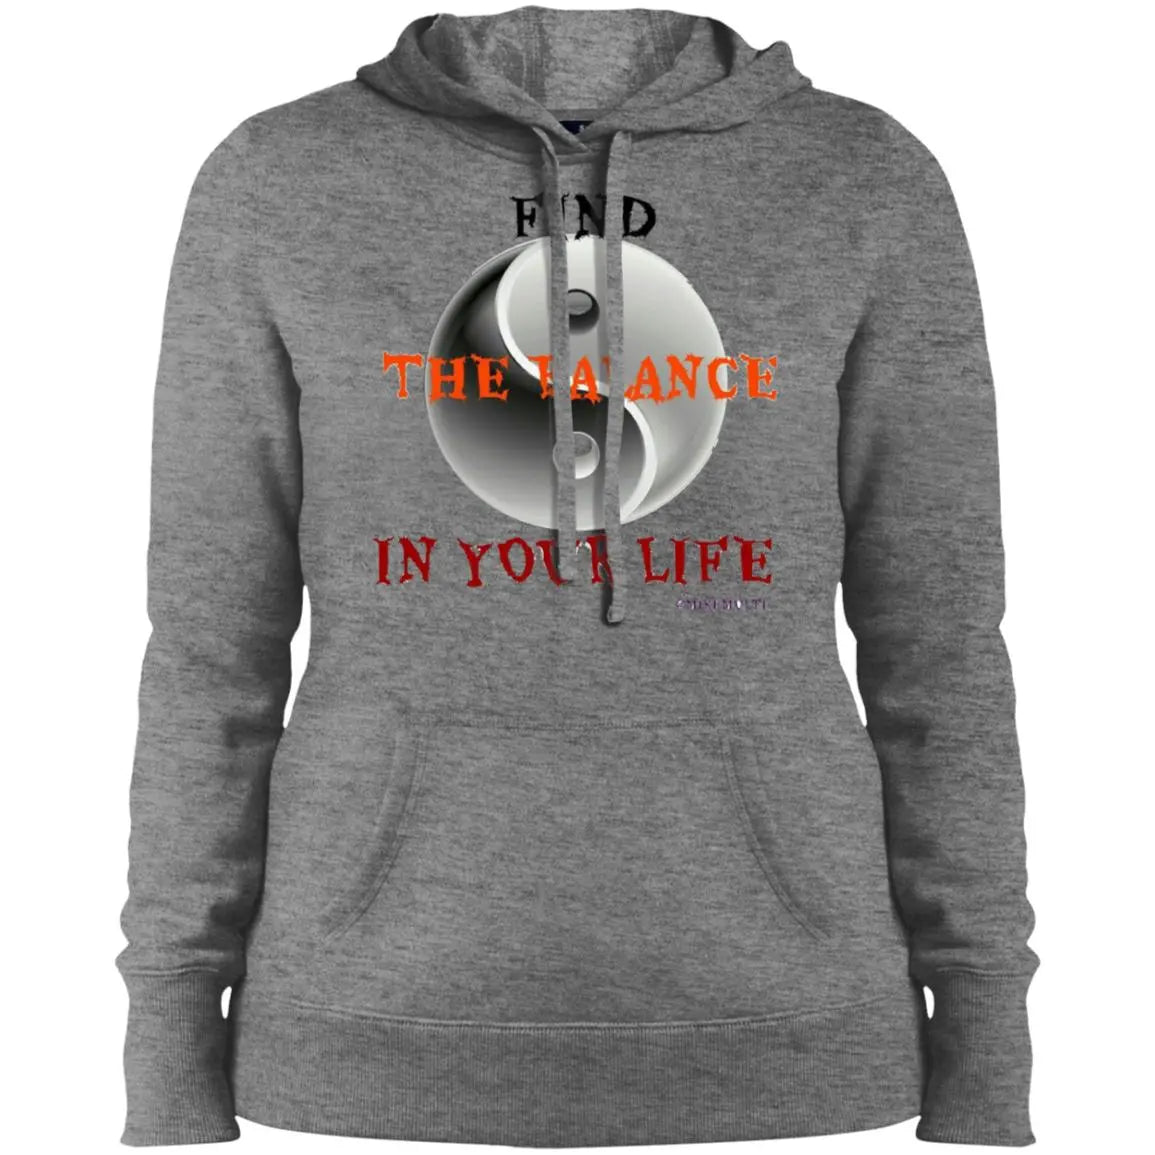 Find The Balance In Your Life - Ladies' Pullover Hooded Sweatshirt CustomCat